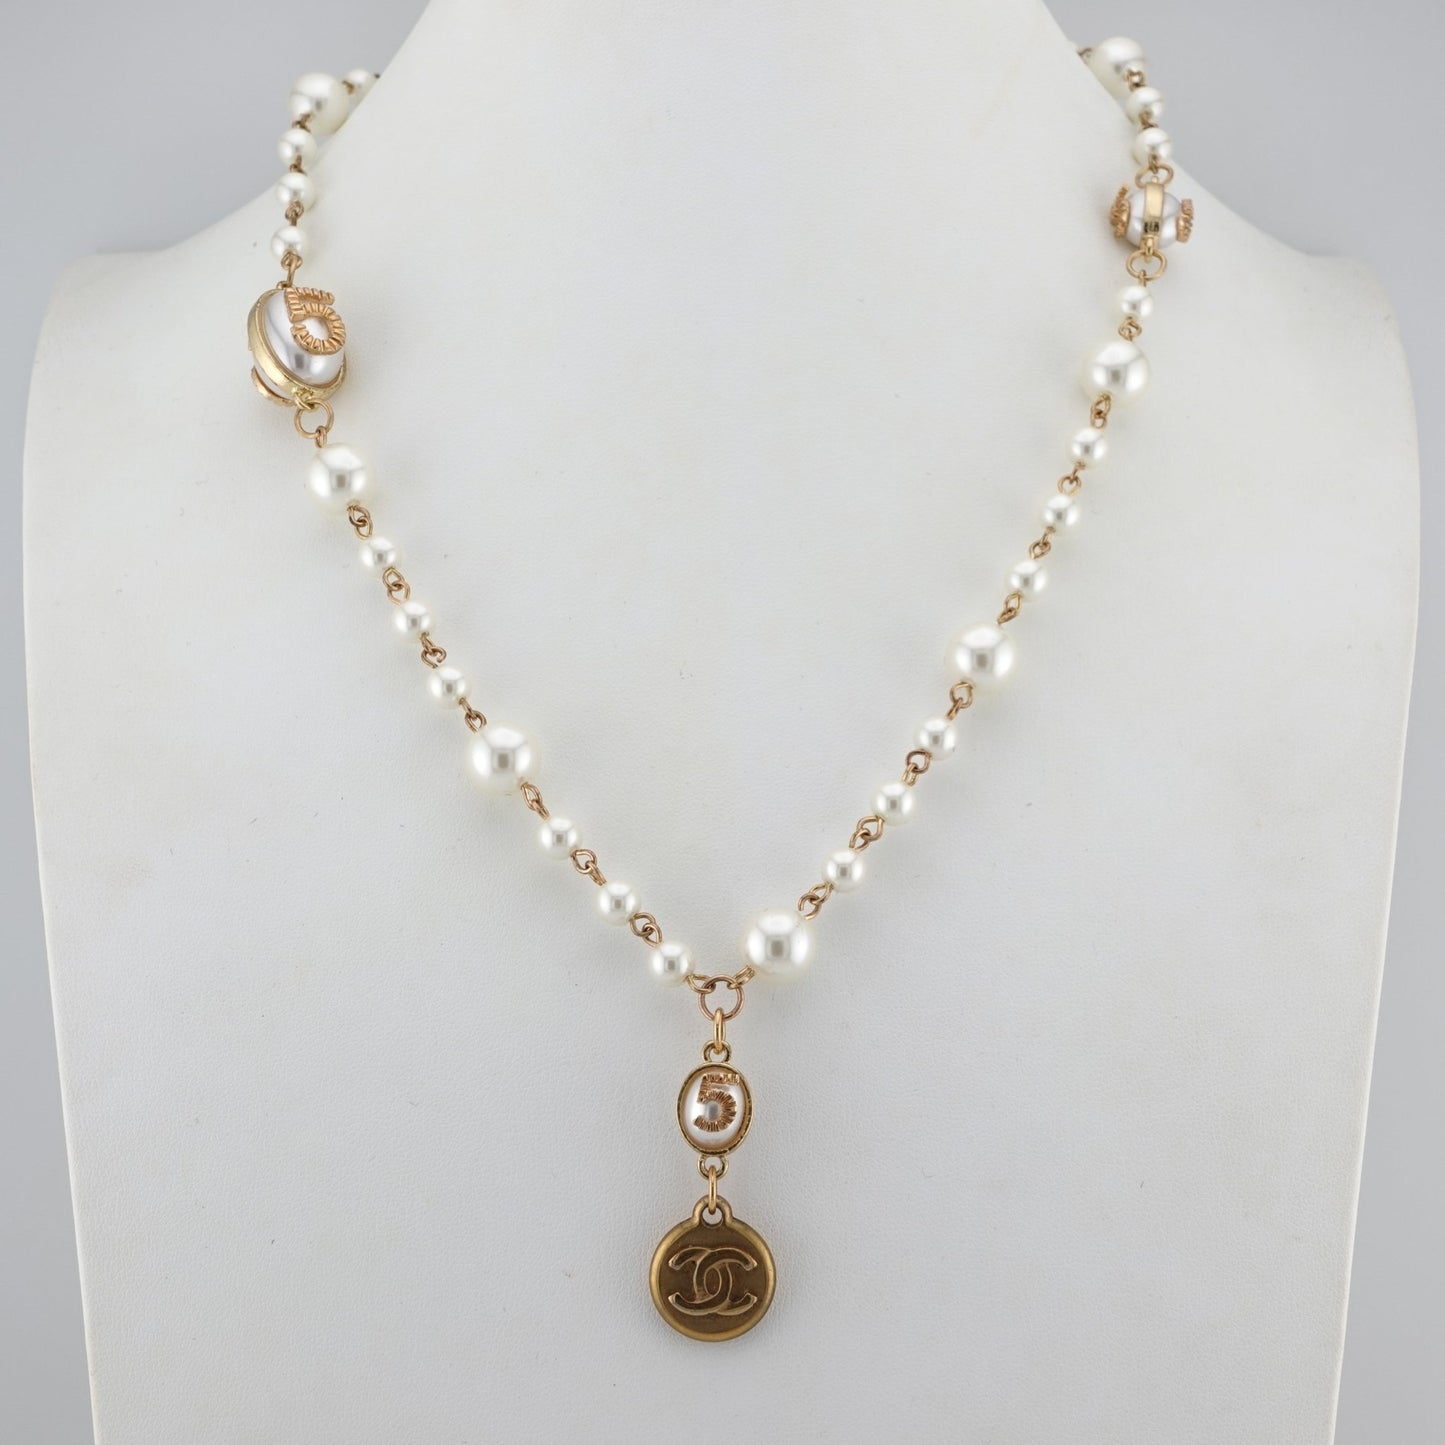 CHANEL Gold CC Logo Charm on Faux Pearl Necklace - Bag Envy